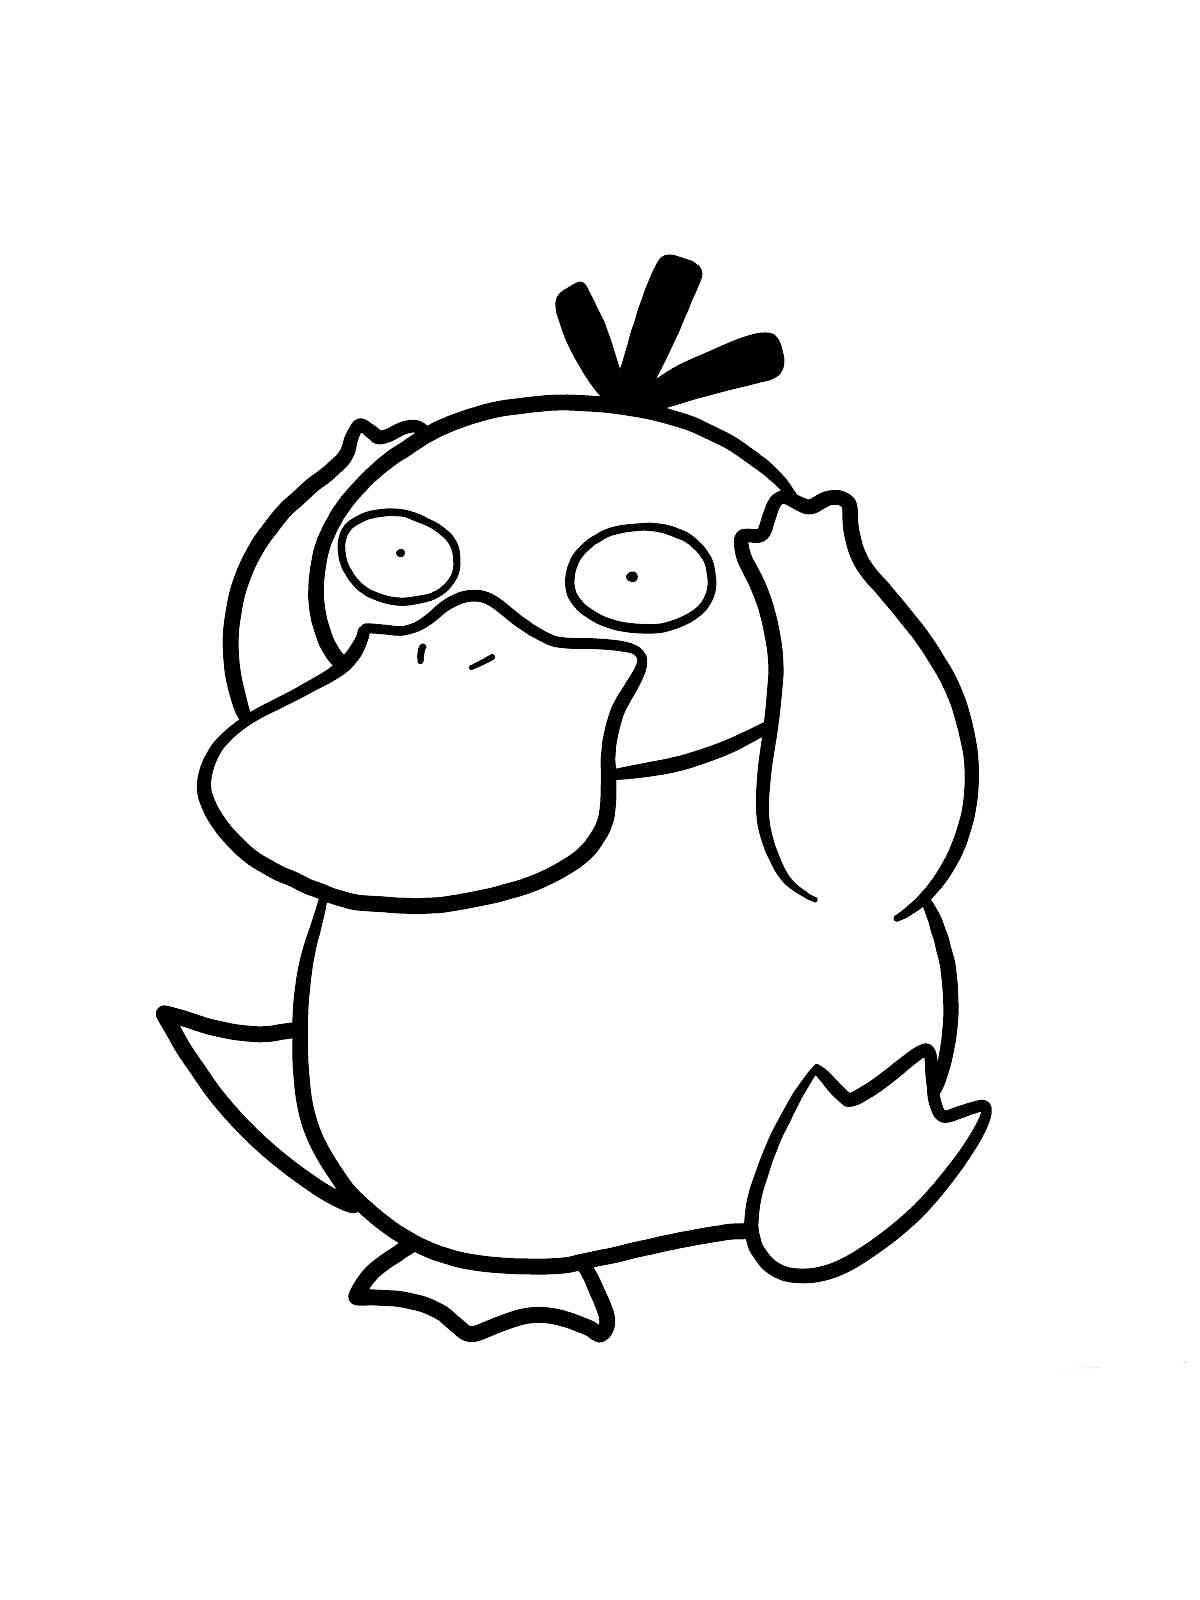 Pokemon Psyduck coloring pages - Free Printable